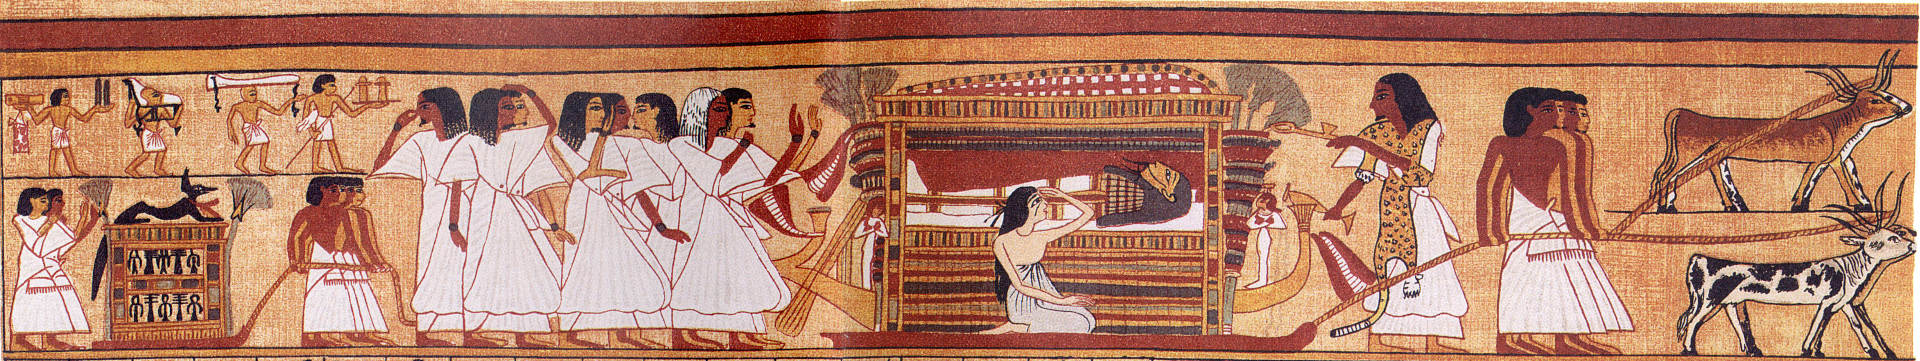 Ancient Egyptian Funeral Ritual 1250 Bce